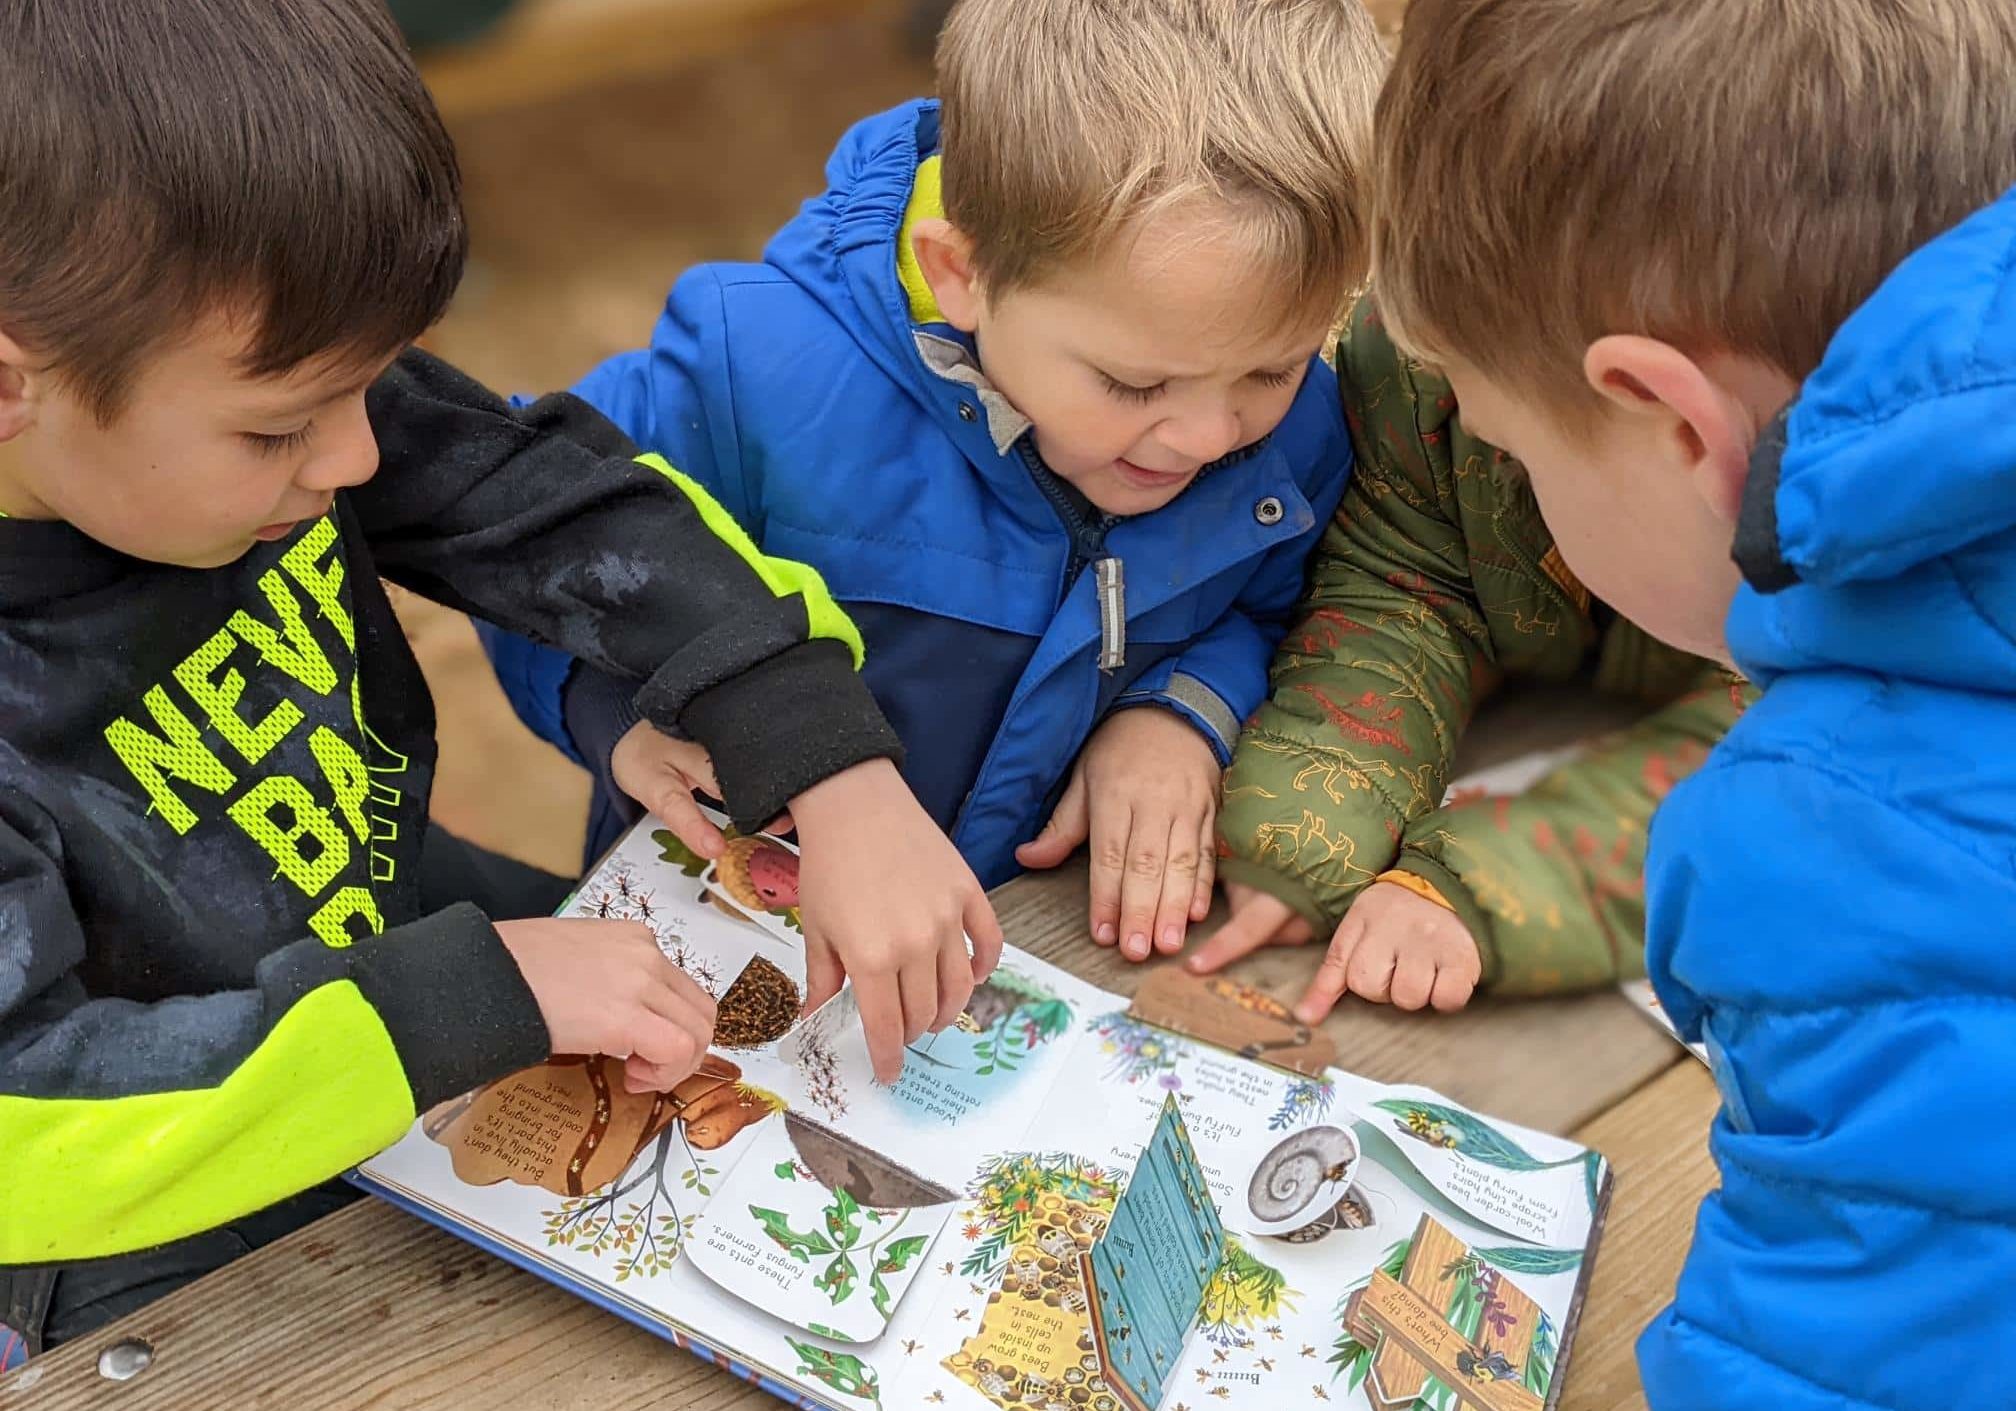 Preschool-age children gather at a picnic table to look at a nature book kids children